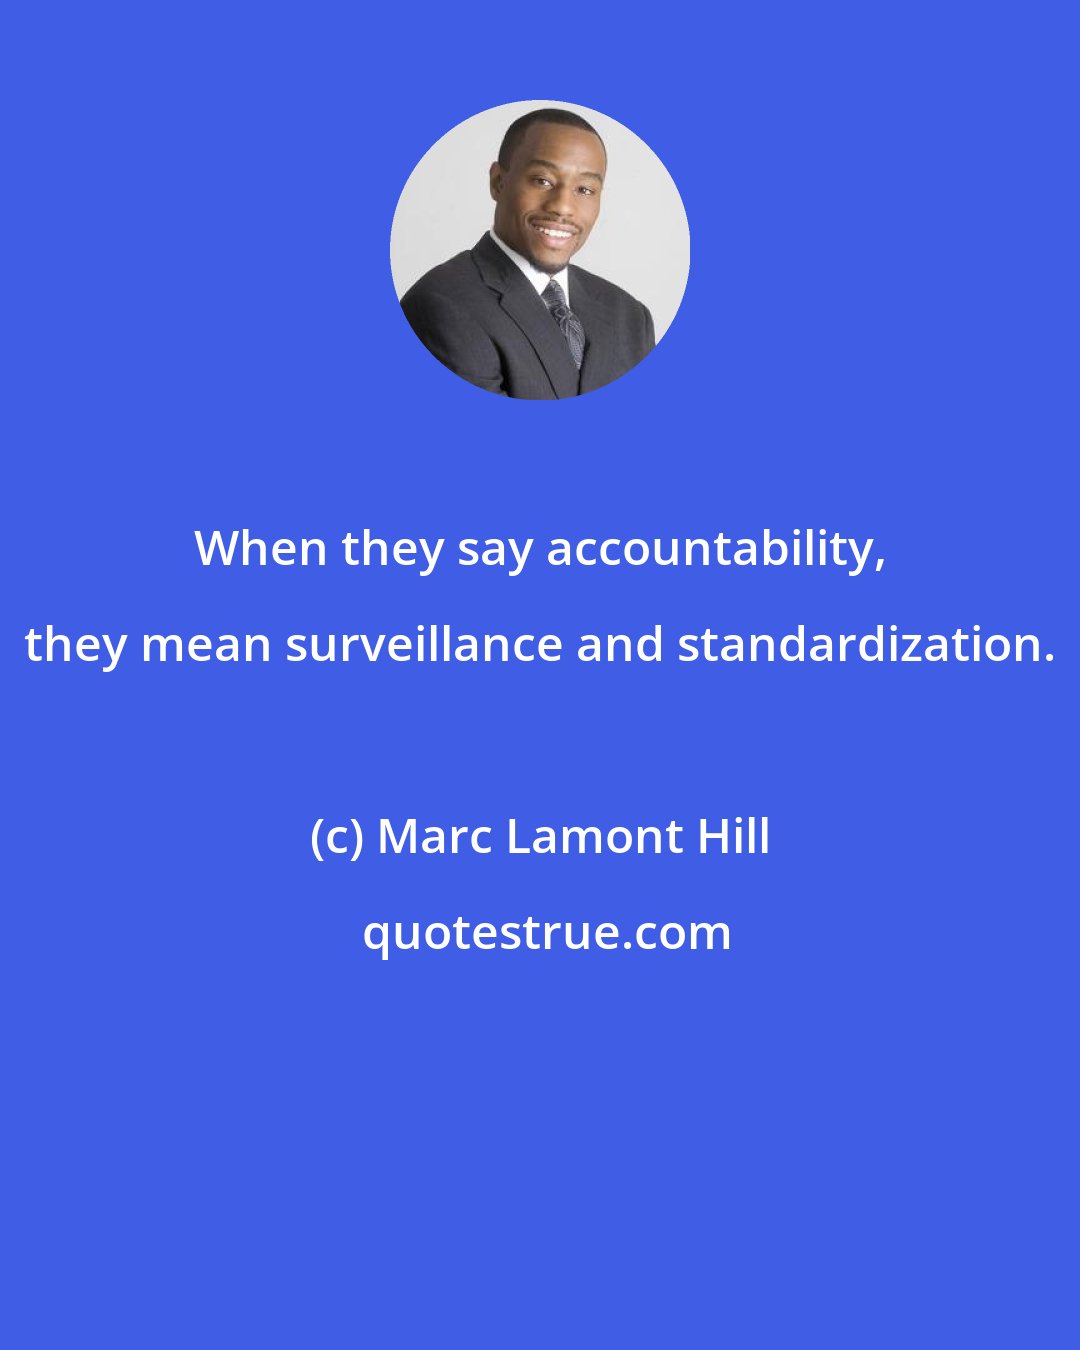 Marc Lamont Hill: When they say accountability, they mean surveillance and standardization.